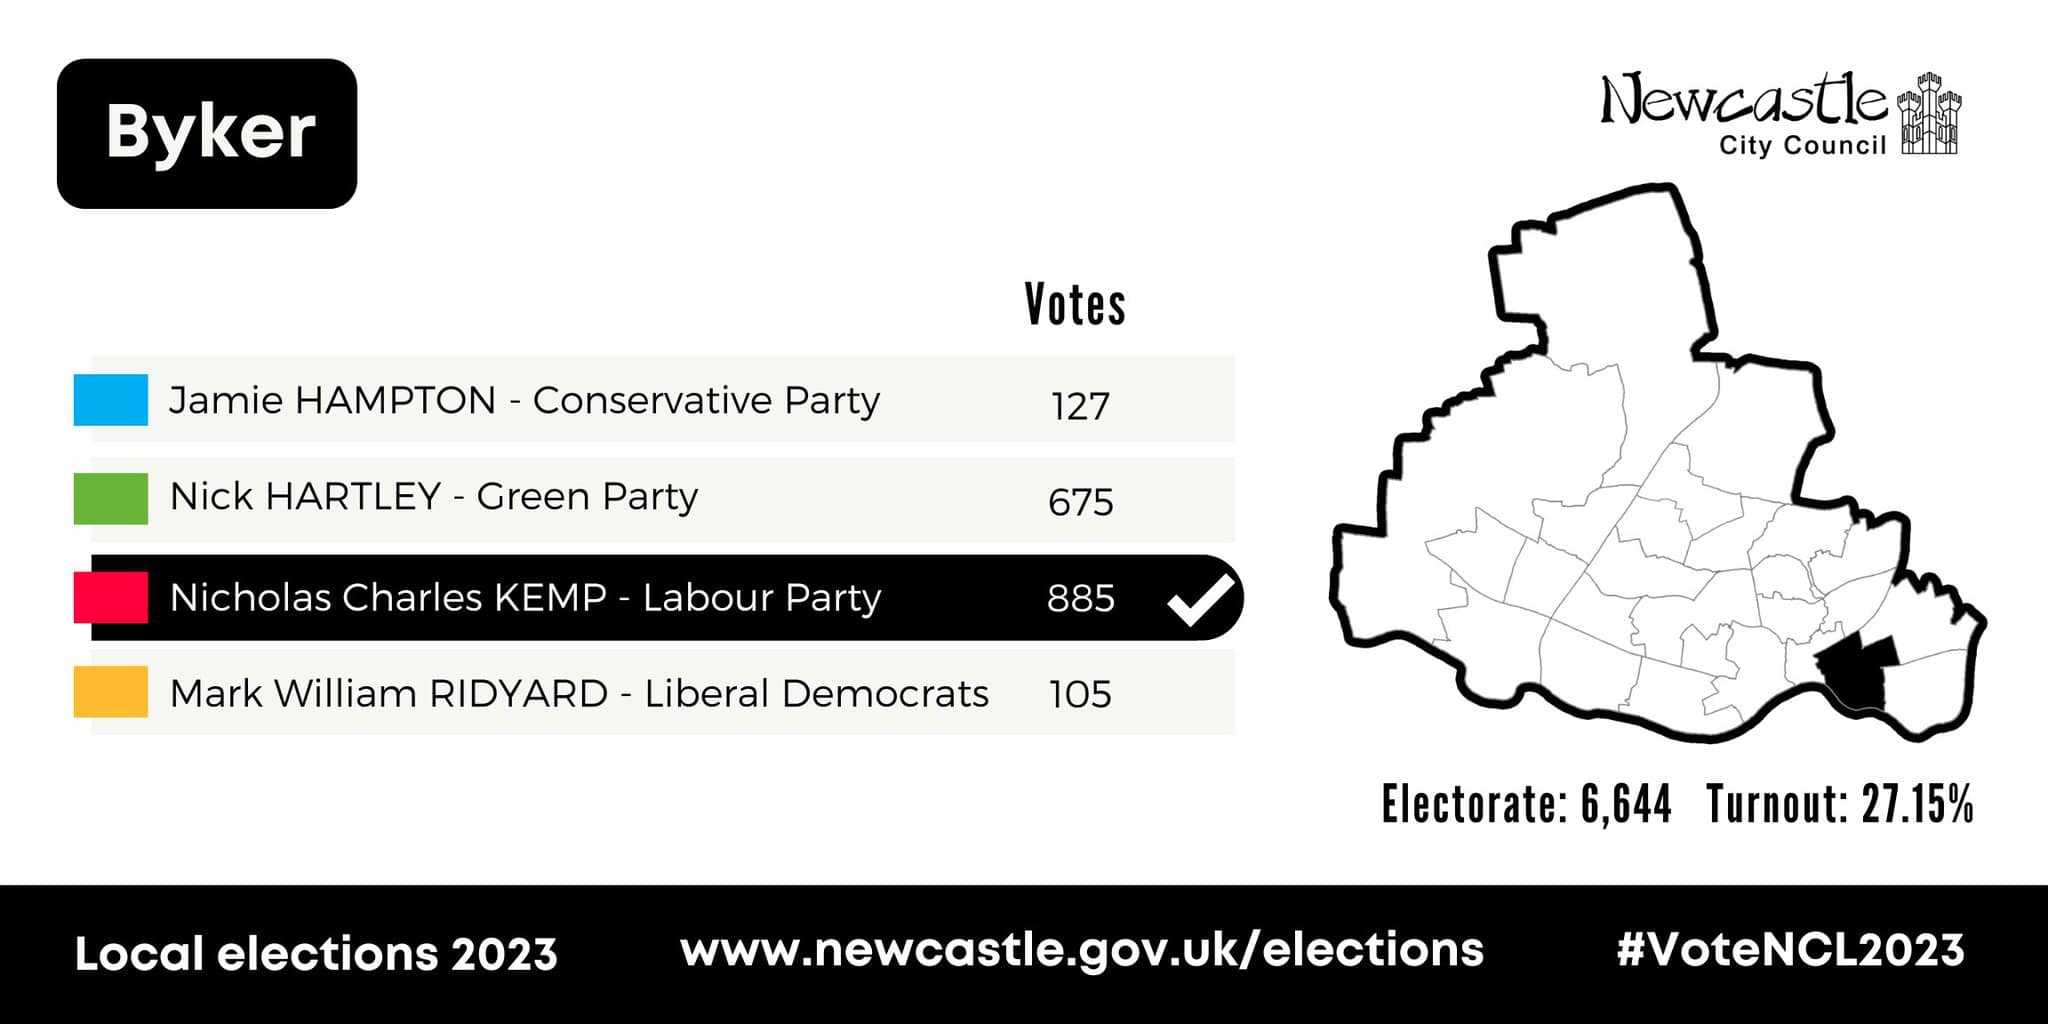 Byker - Local election results 2023